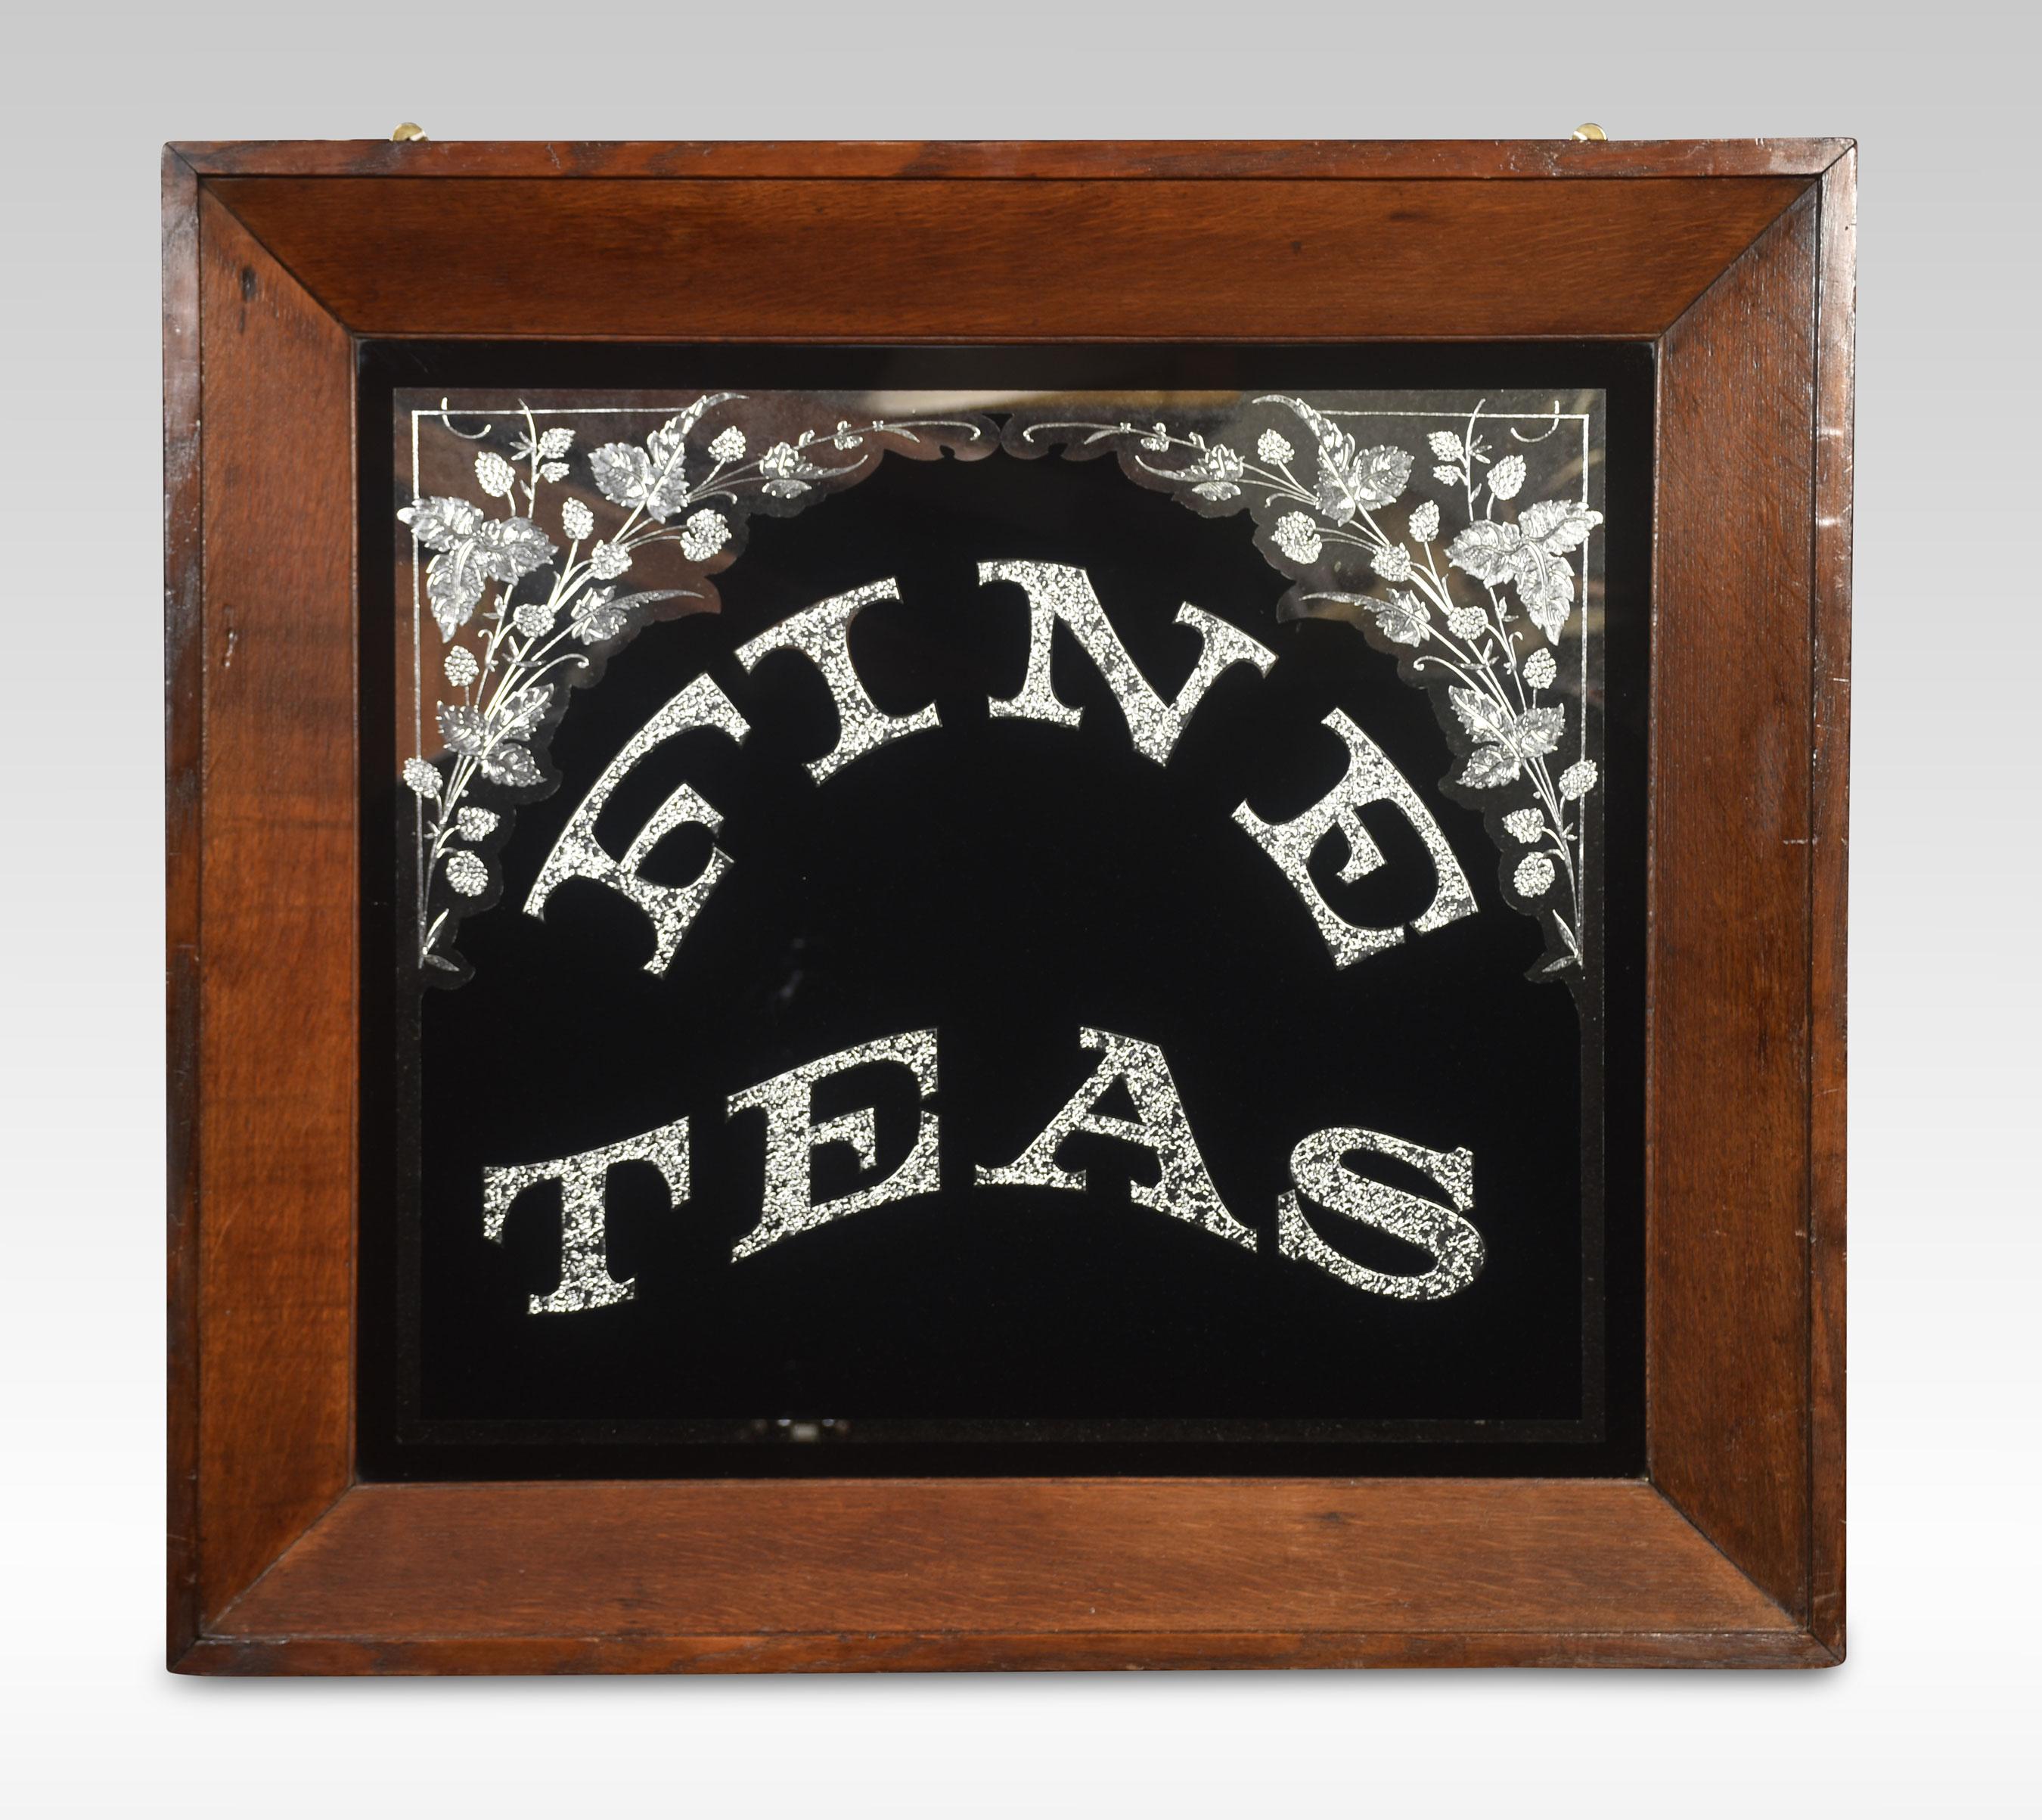 Oak framed advertising mirror encased in oak frame, inscribed Fine Teas on a black background decorated with floral relief.
Dimensions
Height 30.5 inches
Width 34 inches
Depth 3 inches.